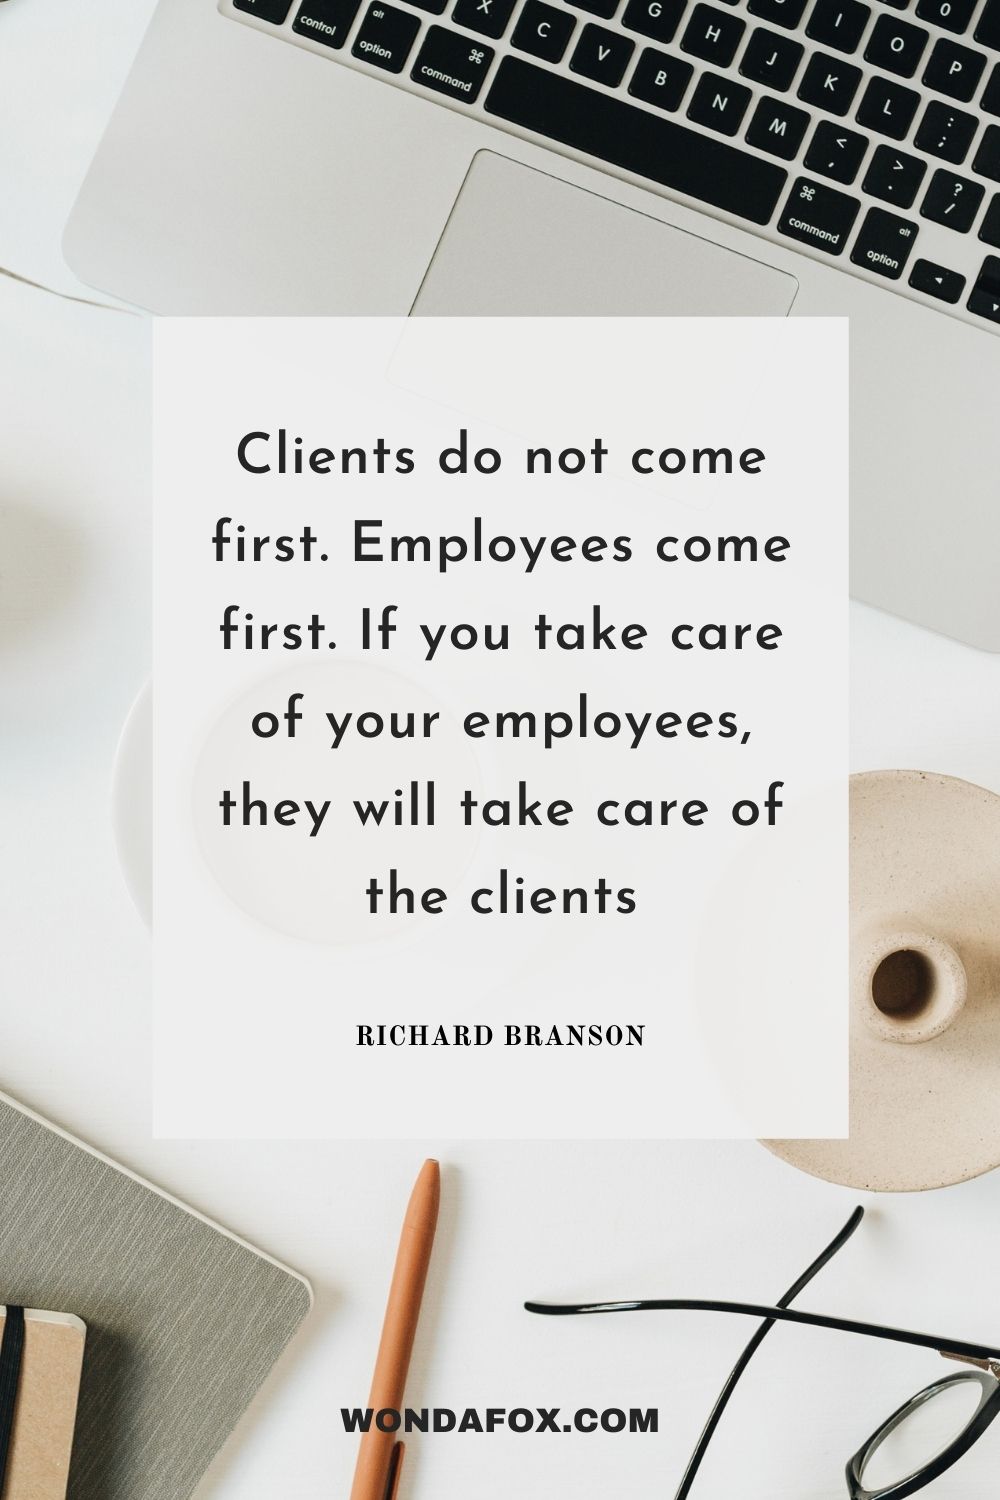 Clients do not come first. Employees come first. If you take care of your employees, they will take care of the clients